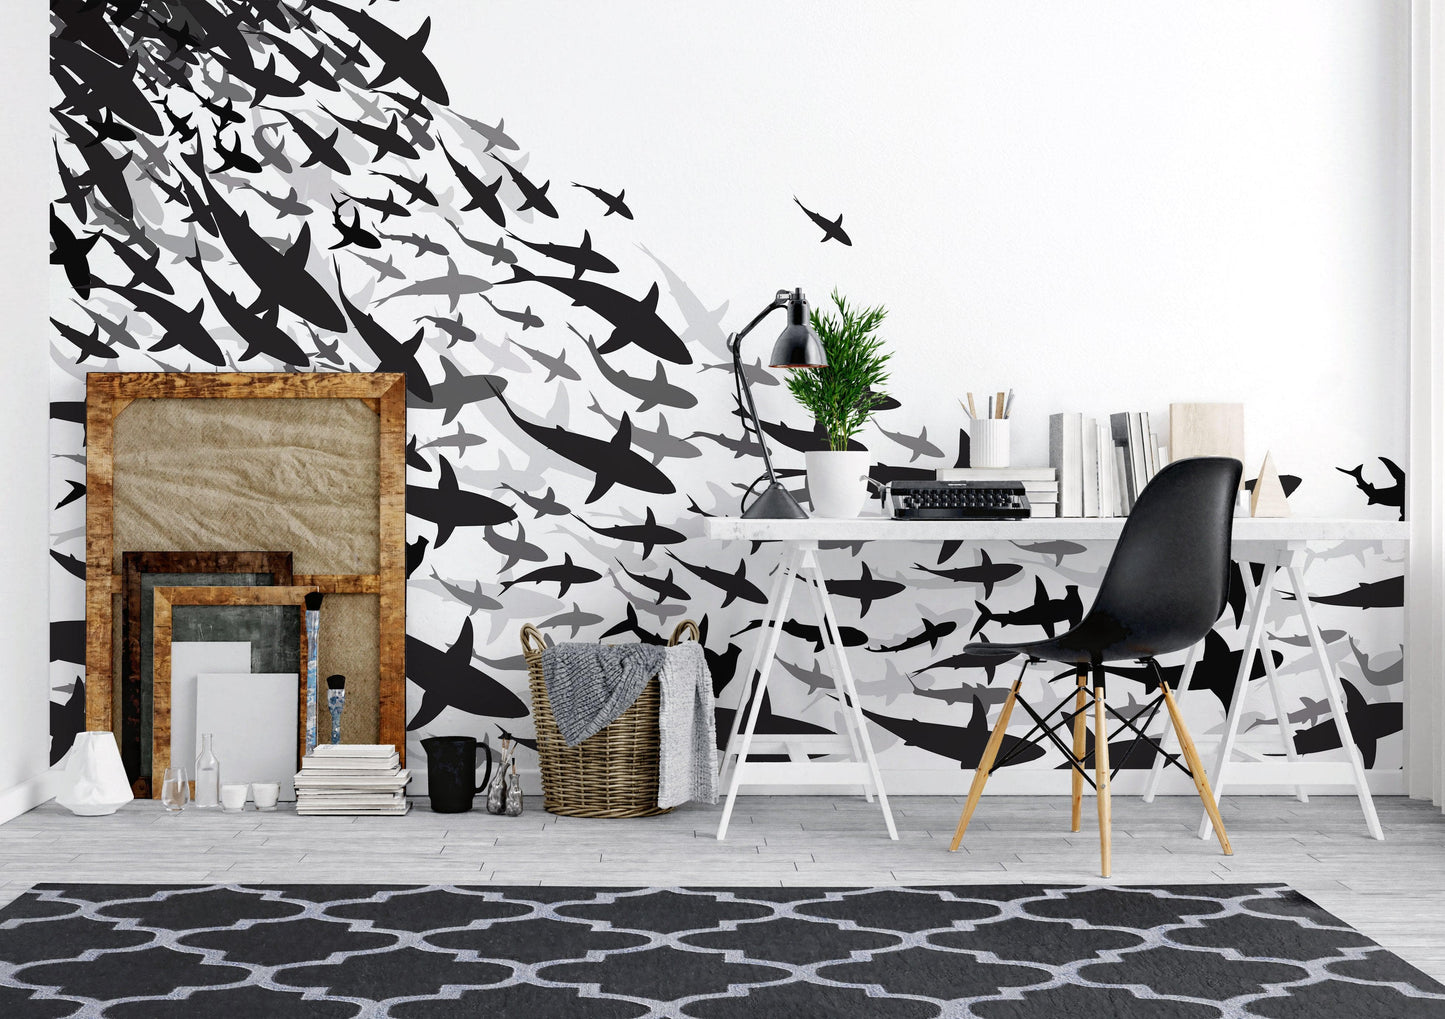 Shark Frenzy Underwater Wall Mural. Peel and Stick Wallpaper. Black and White Shark Silhouettes  #6347